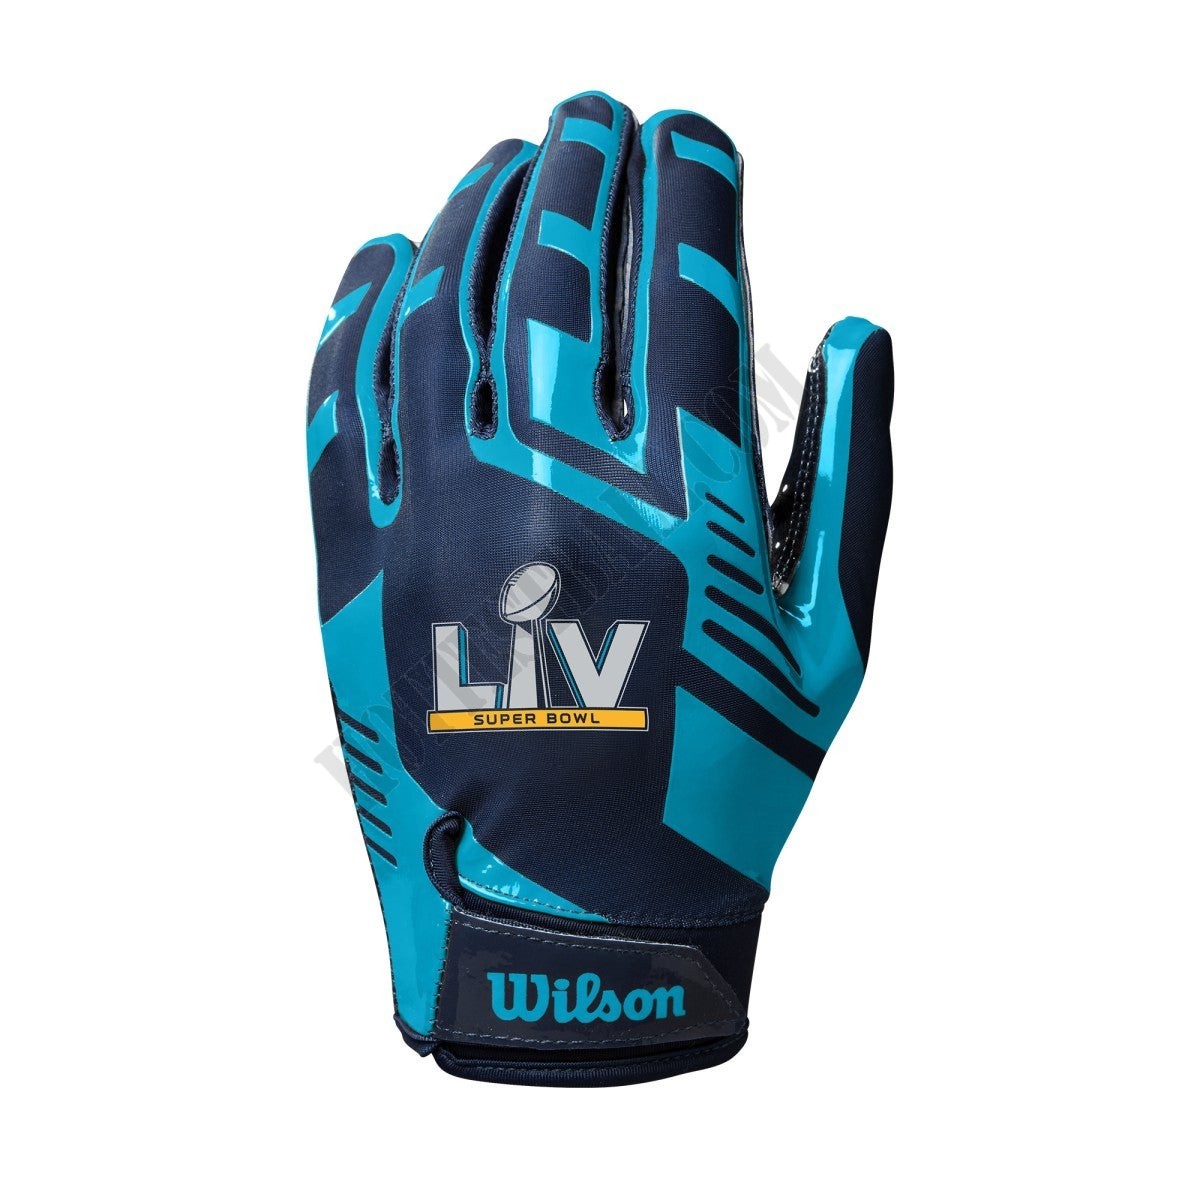 Super Bowl LV Stretch Fit Youth Receivers Gloves - Wilson Discount Store - -1